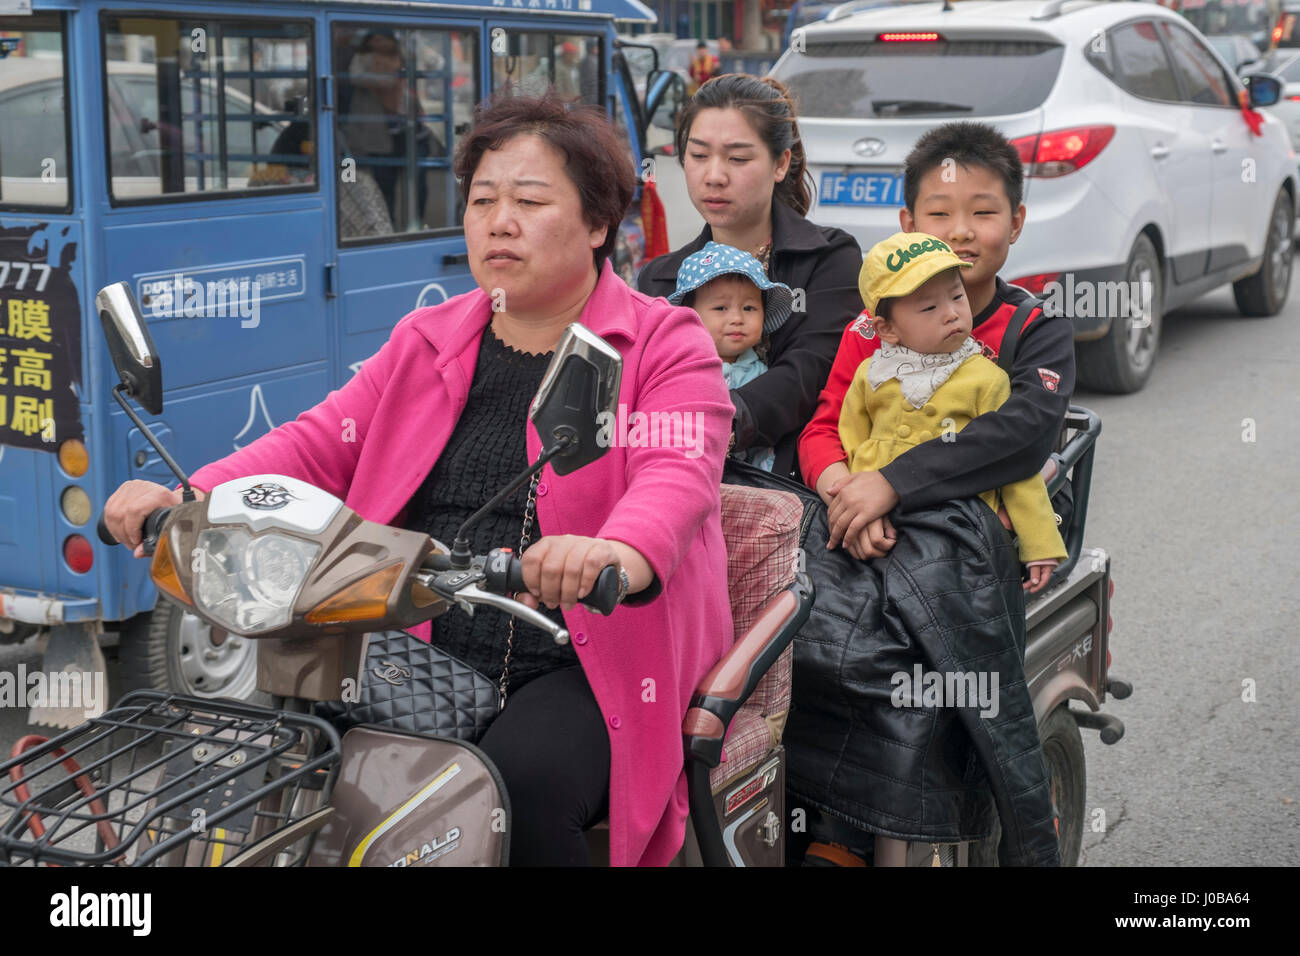 A family in Xiong County, Hebei province,China. 09-Apr-2017 Stock Photo